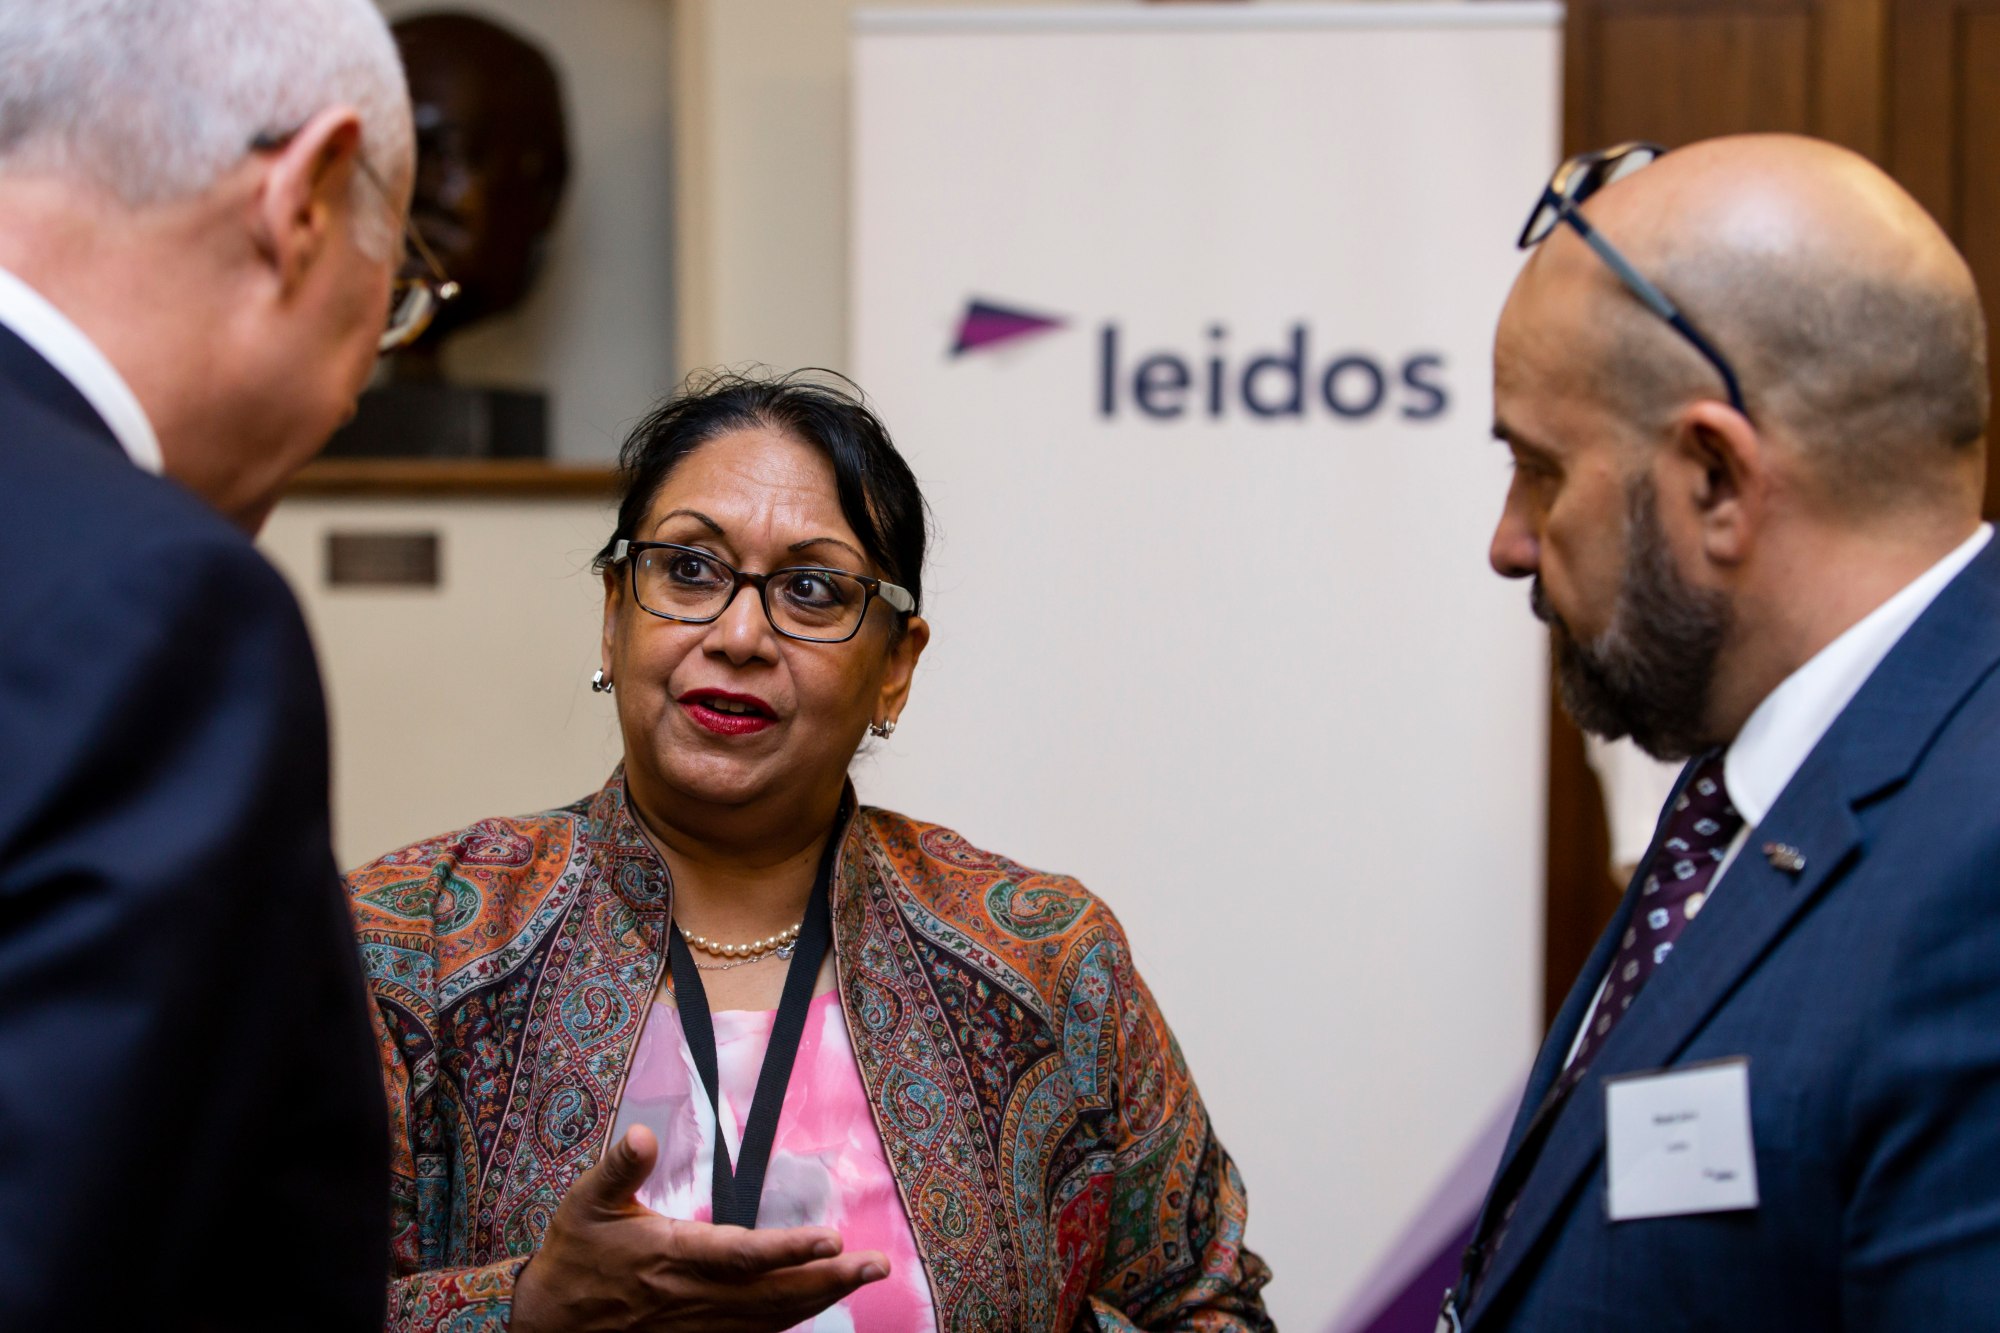 Baroness Verma pictured with Leidos UK and Europe's Simon Fovargue and Stuart John | Credit: Visual Eye